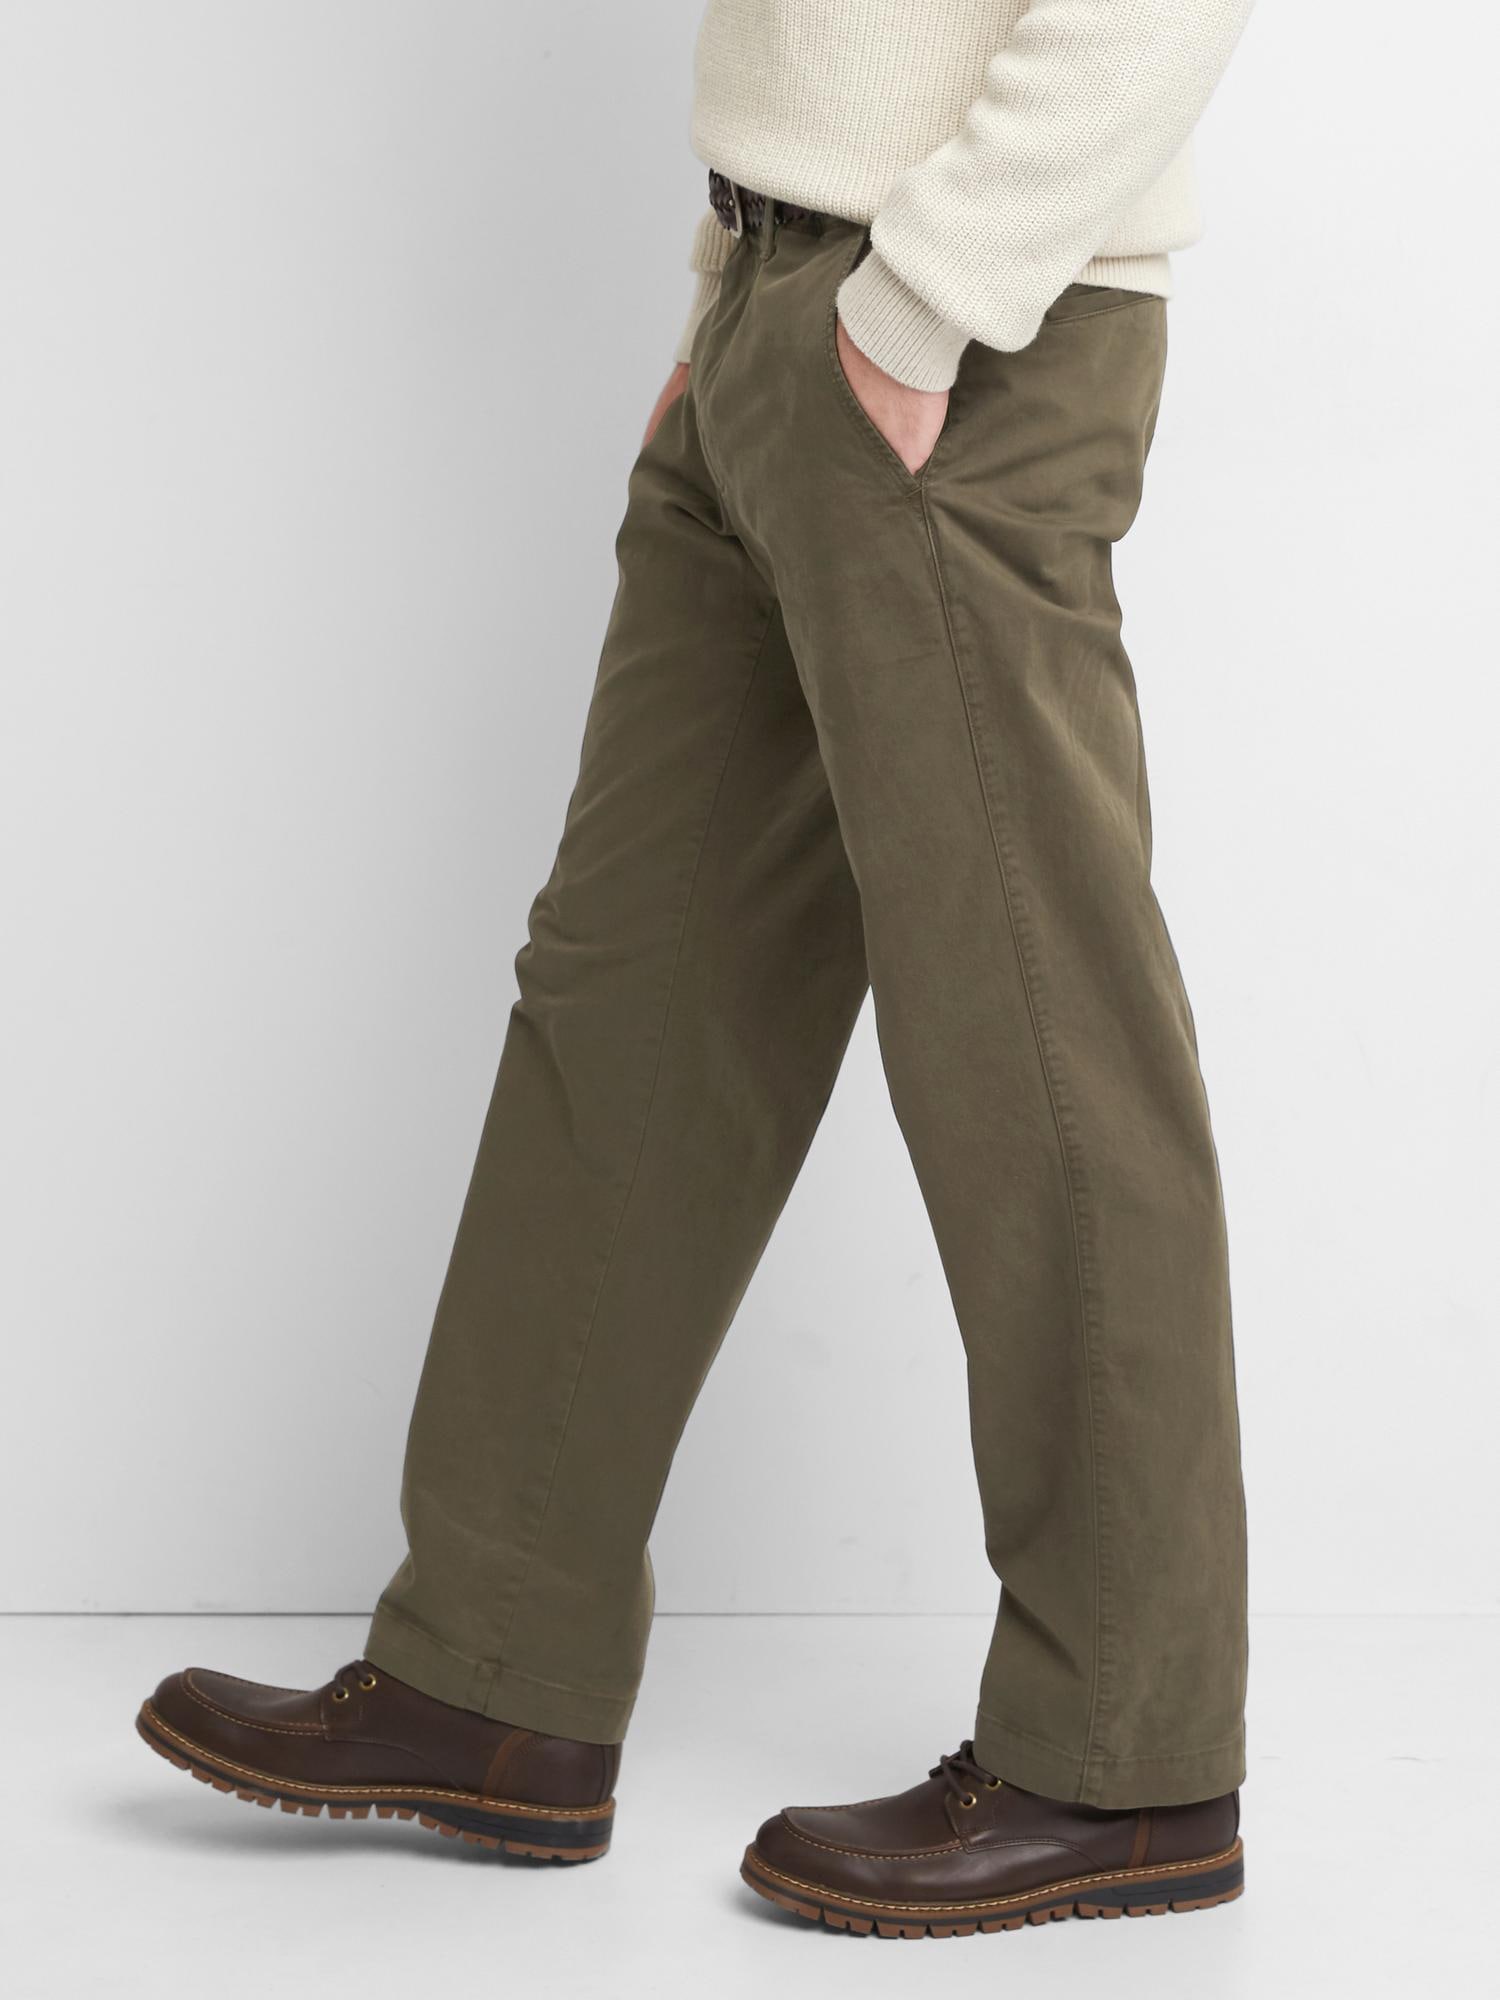 Vintage Khakis in Relaxed Fit with GapFlex | Gap